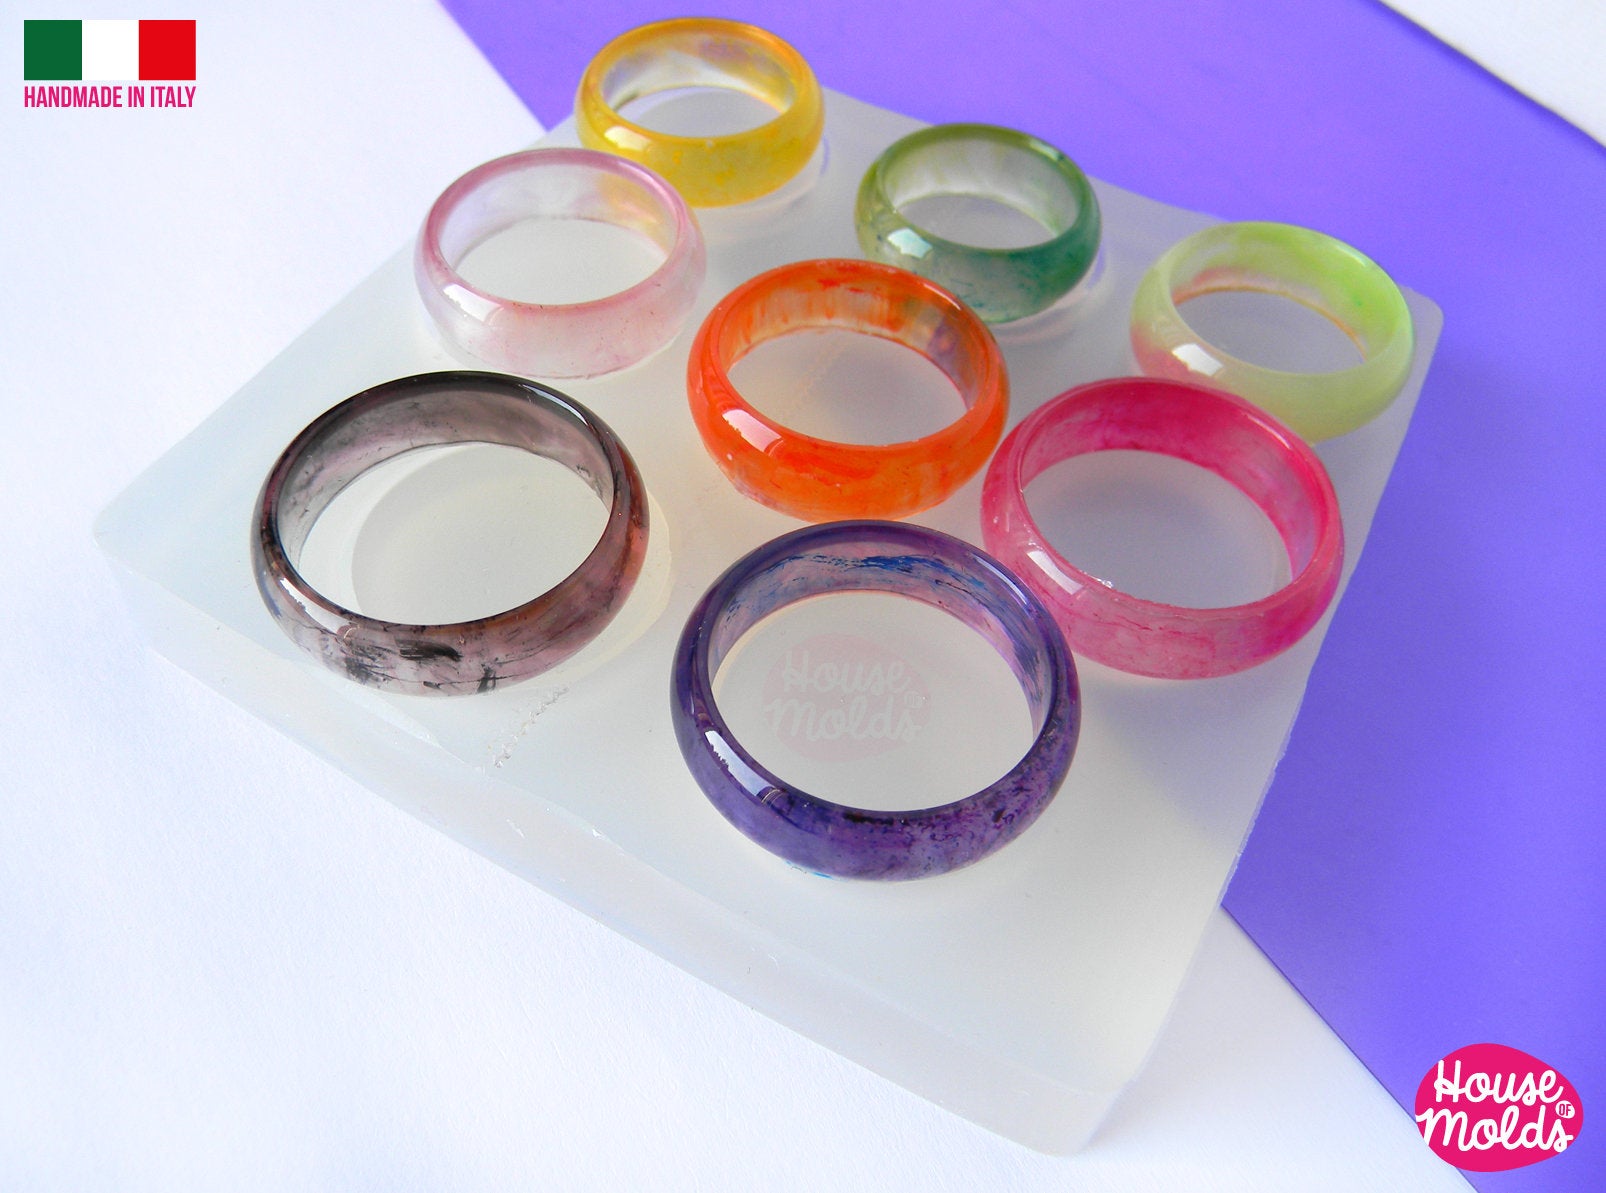 Clear Multi Size Mold ,for 60s resin rings,4 SIZES rings mold